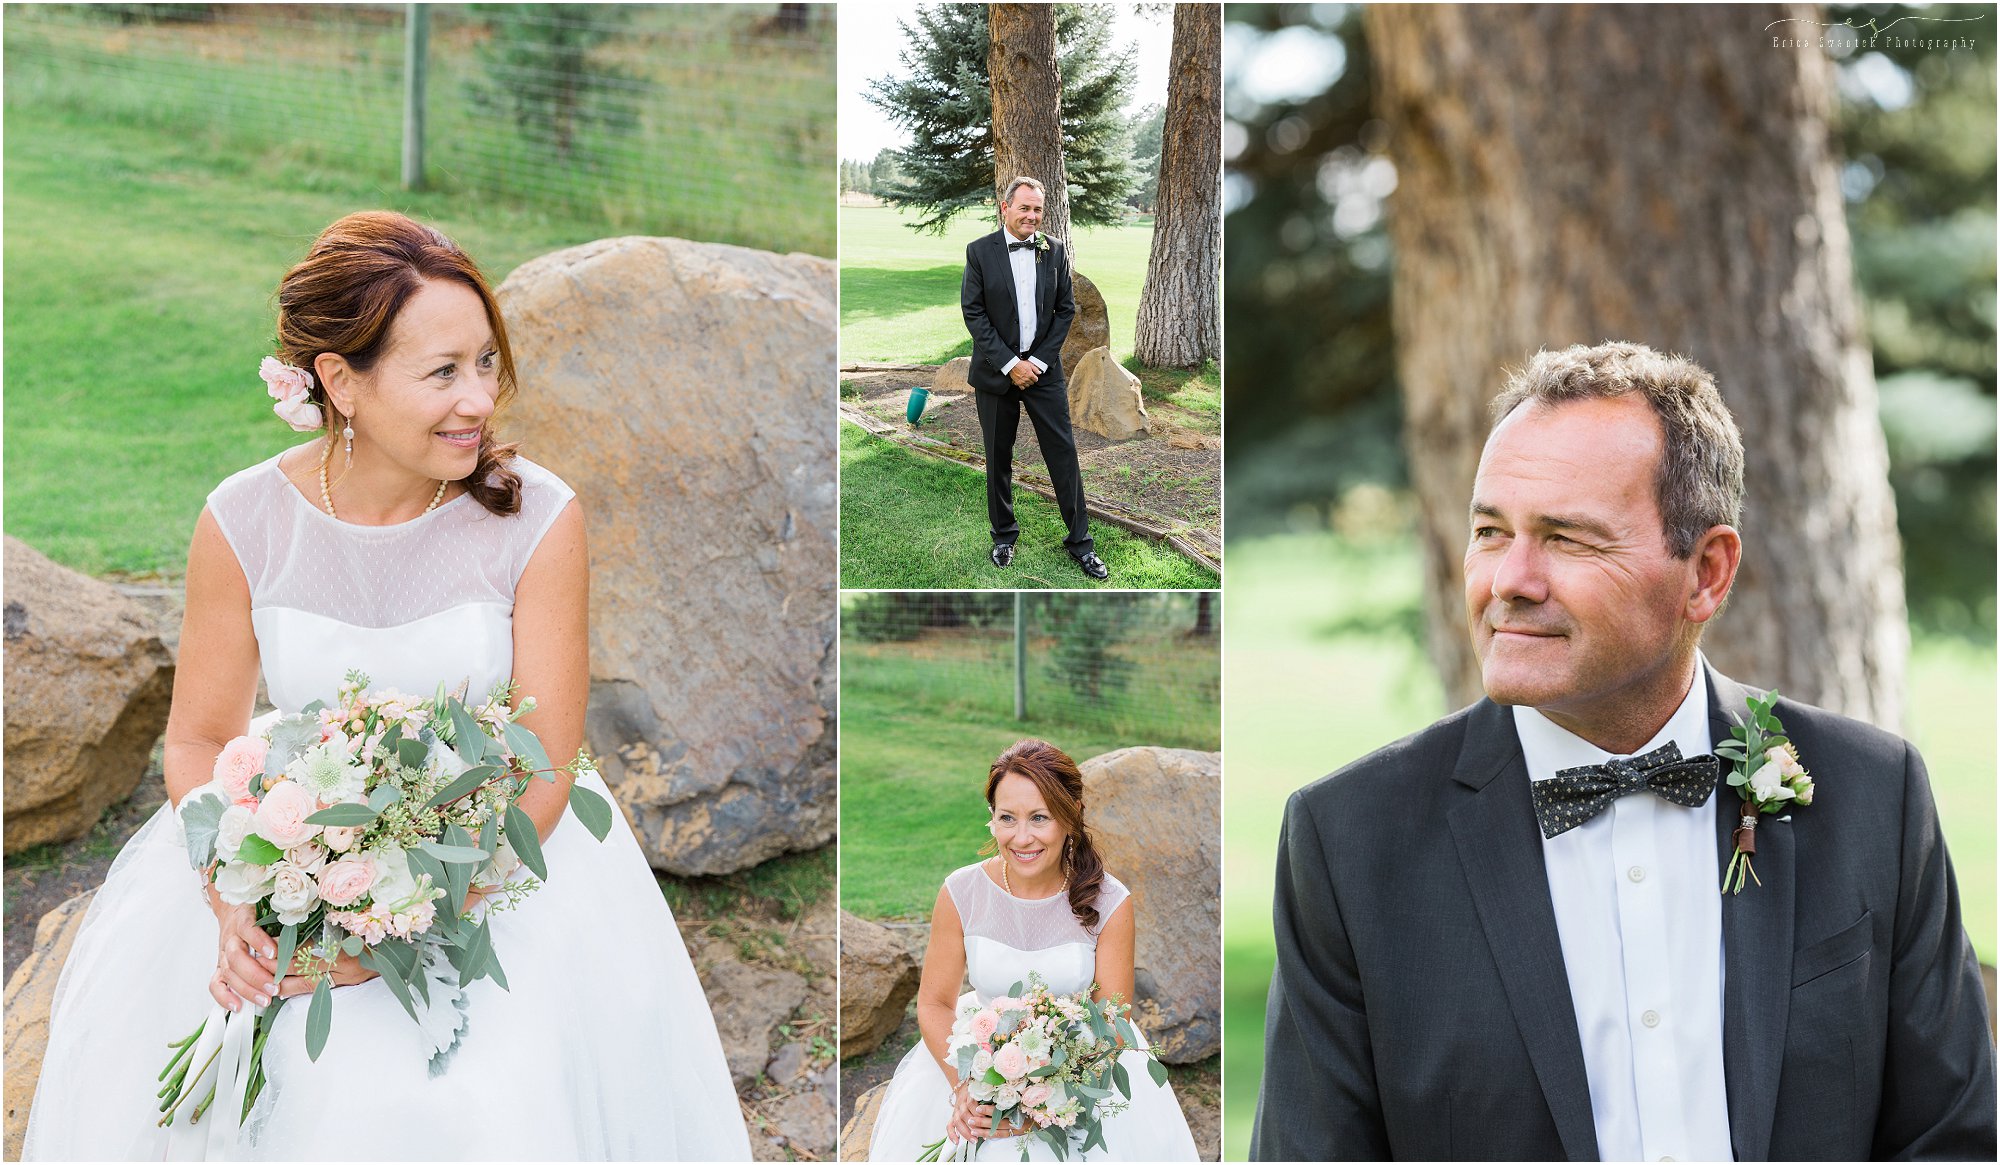 Bride and groom portraits are important memories from your wedding day. | Bend wedding photographer Erica Swantek Photography